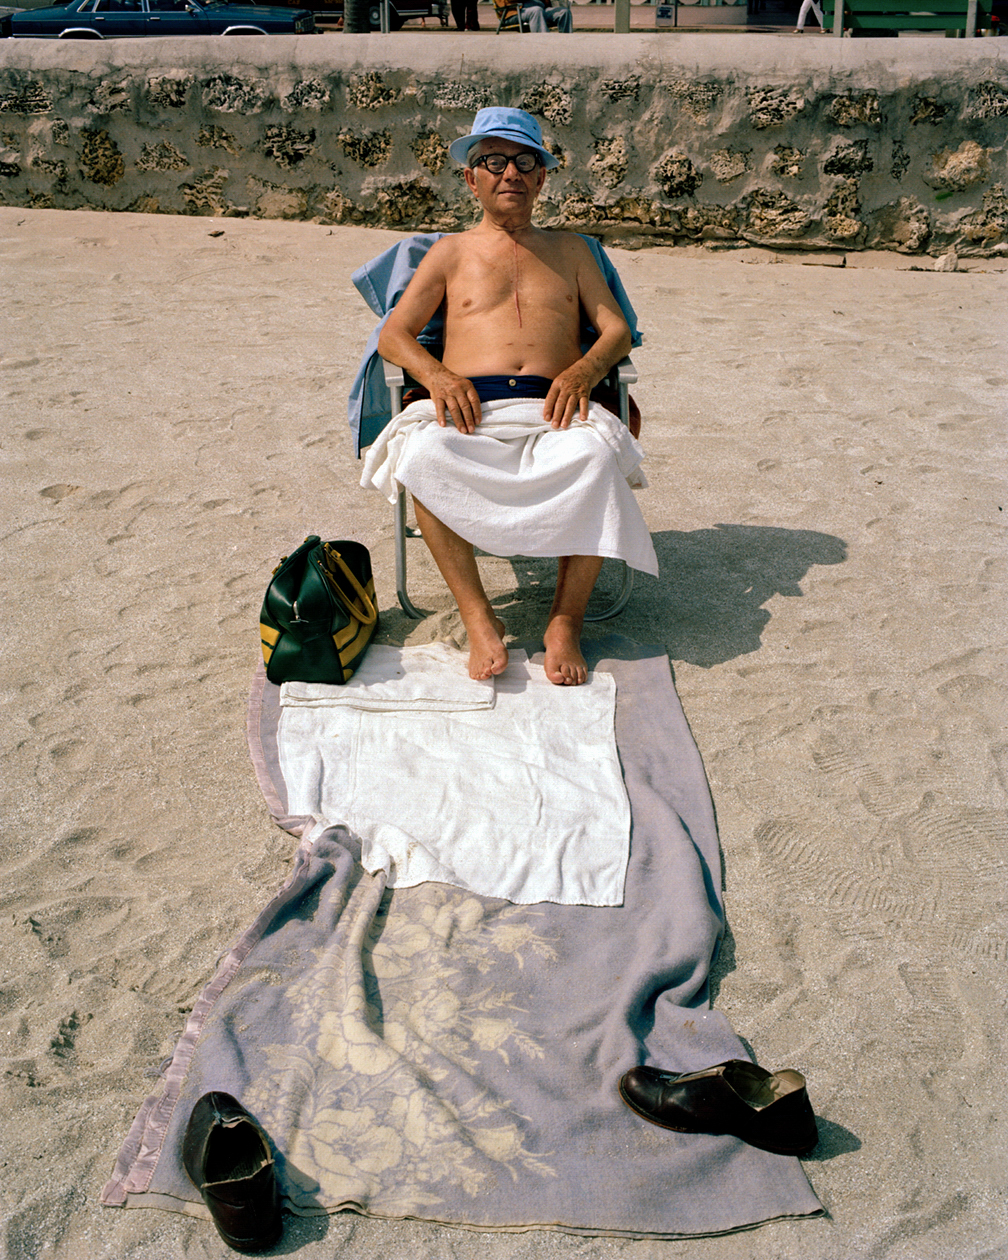 Untitled (Man with Towels) Miami, South Beach, 1982-85